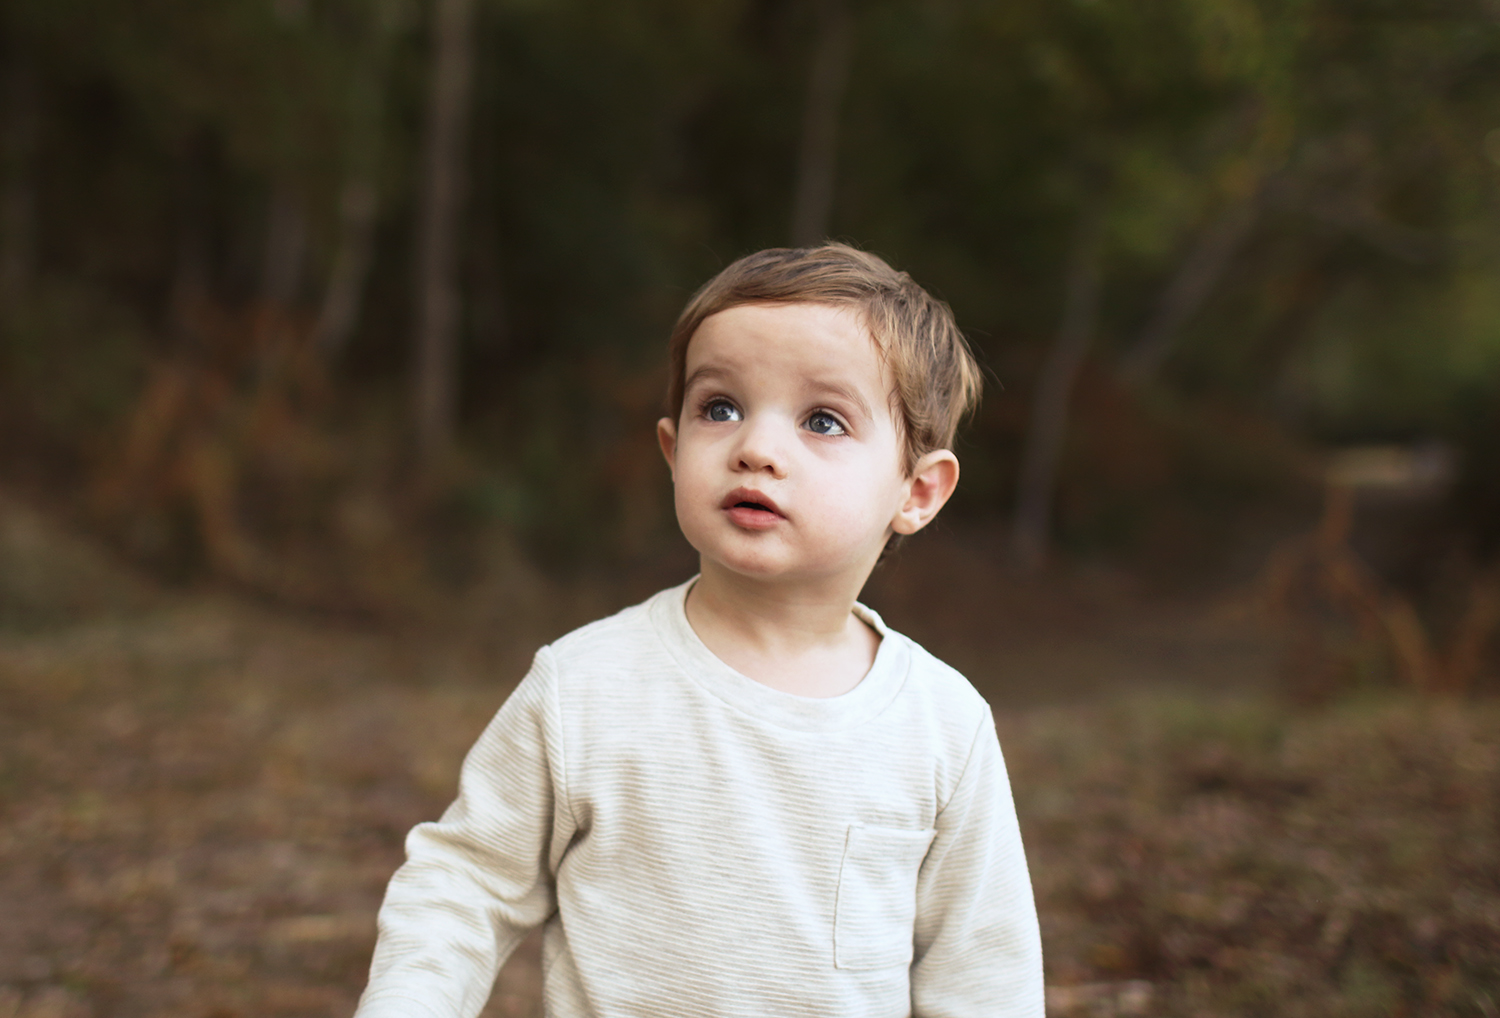 A letter to my son on his 2nd birthday. Catch it now on Haus of Layne! #Motherhood #RaisingKids #BirthdayTraditionIdeas #BirthdayPortraits #MemoryKeeping #ProjectLife